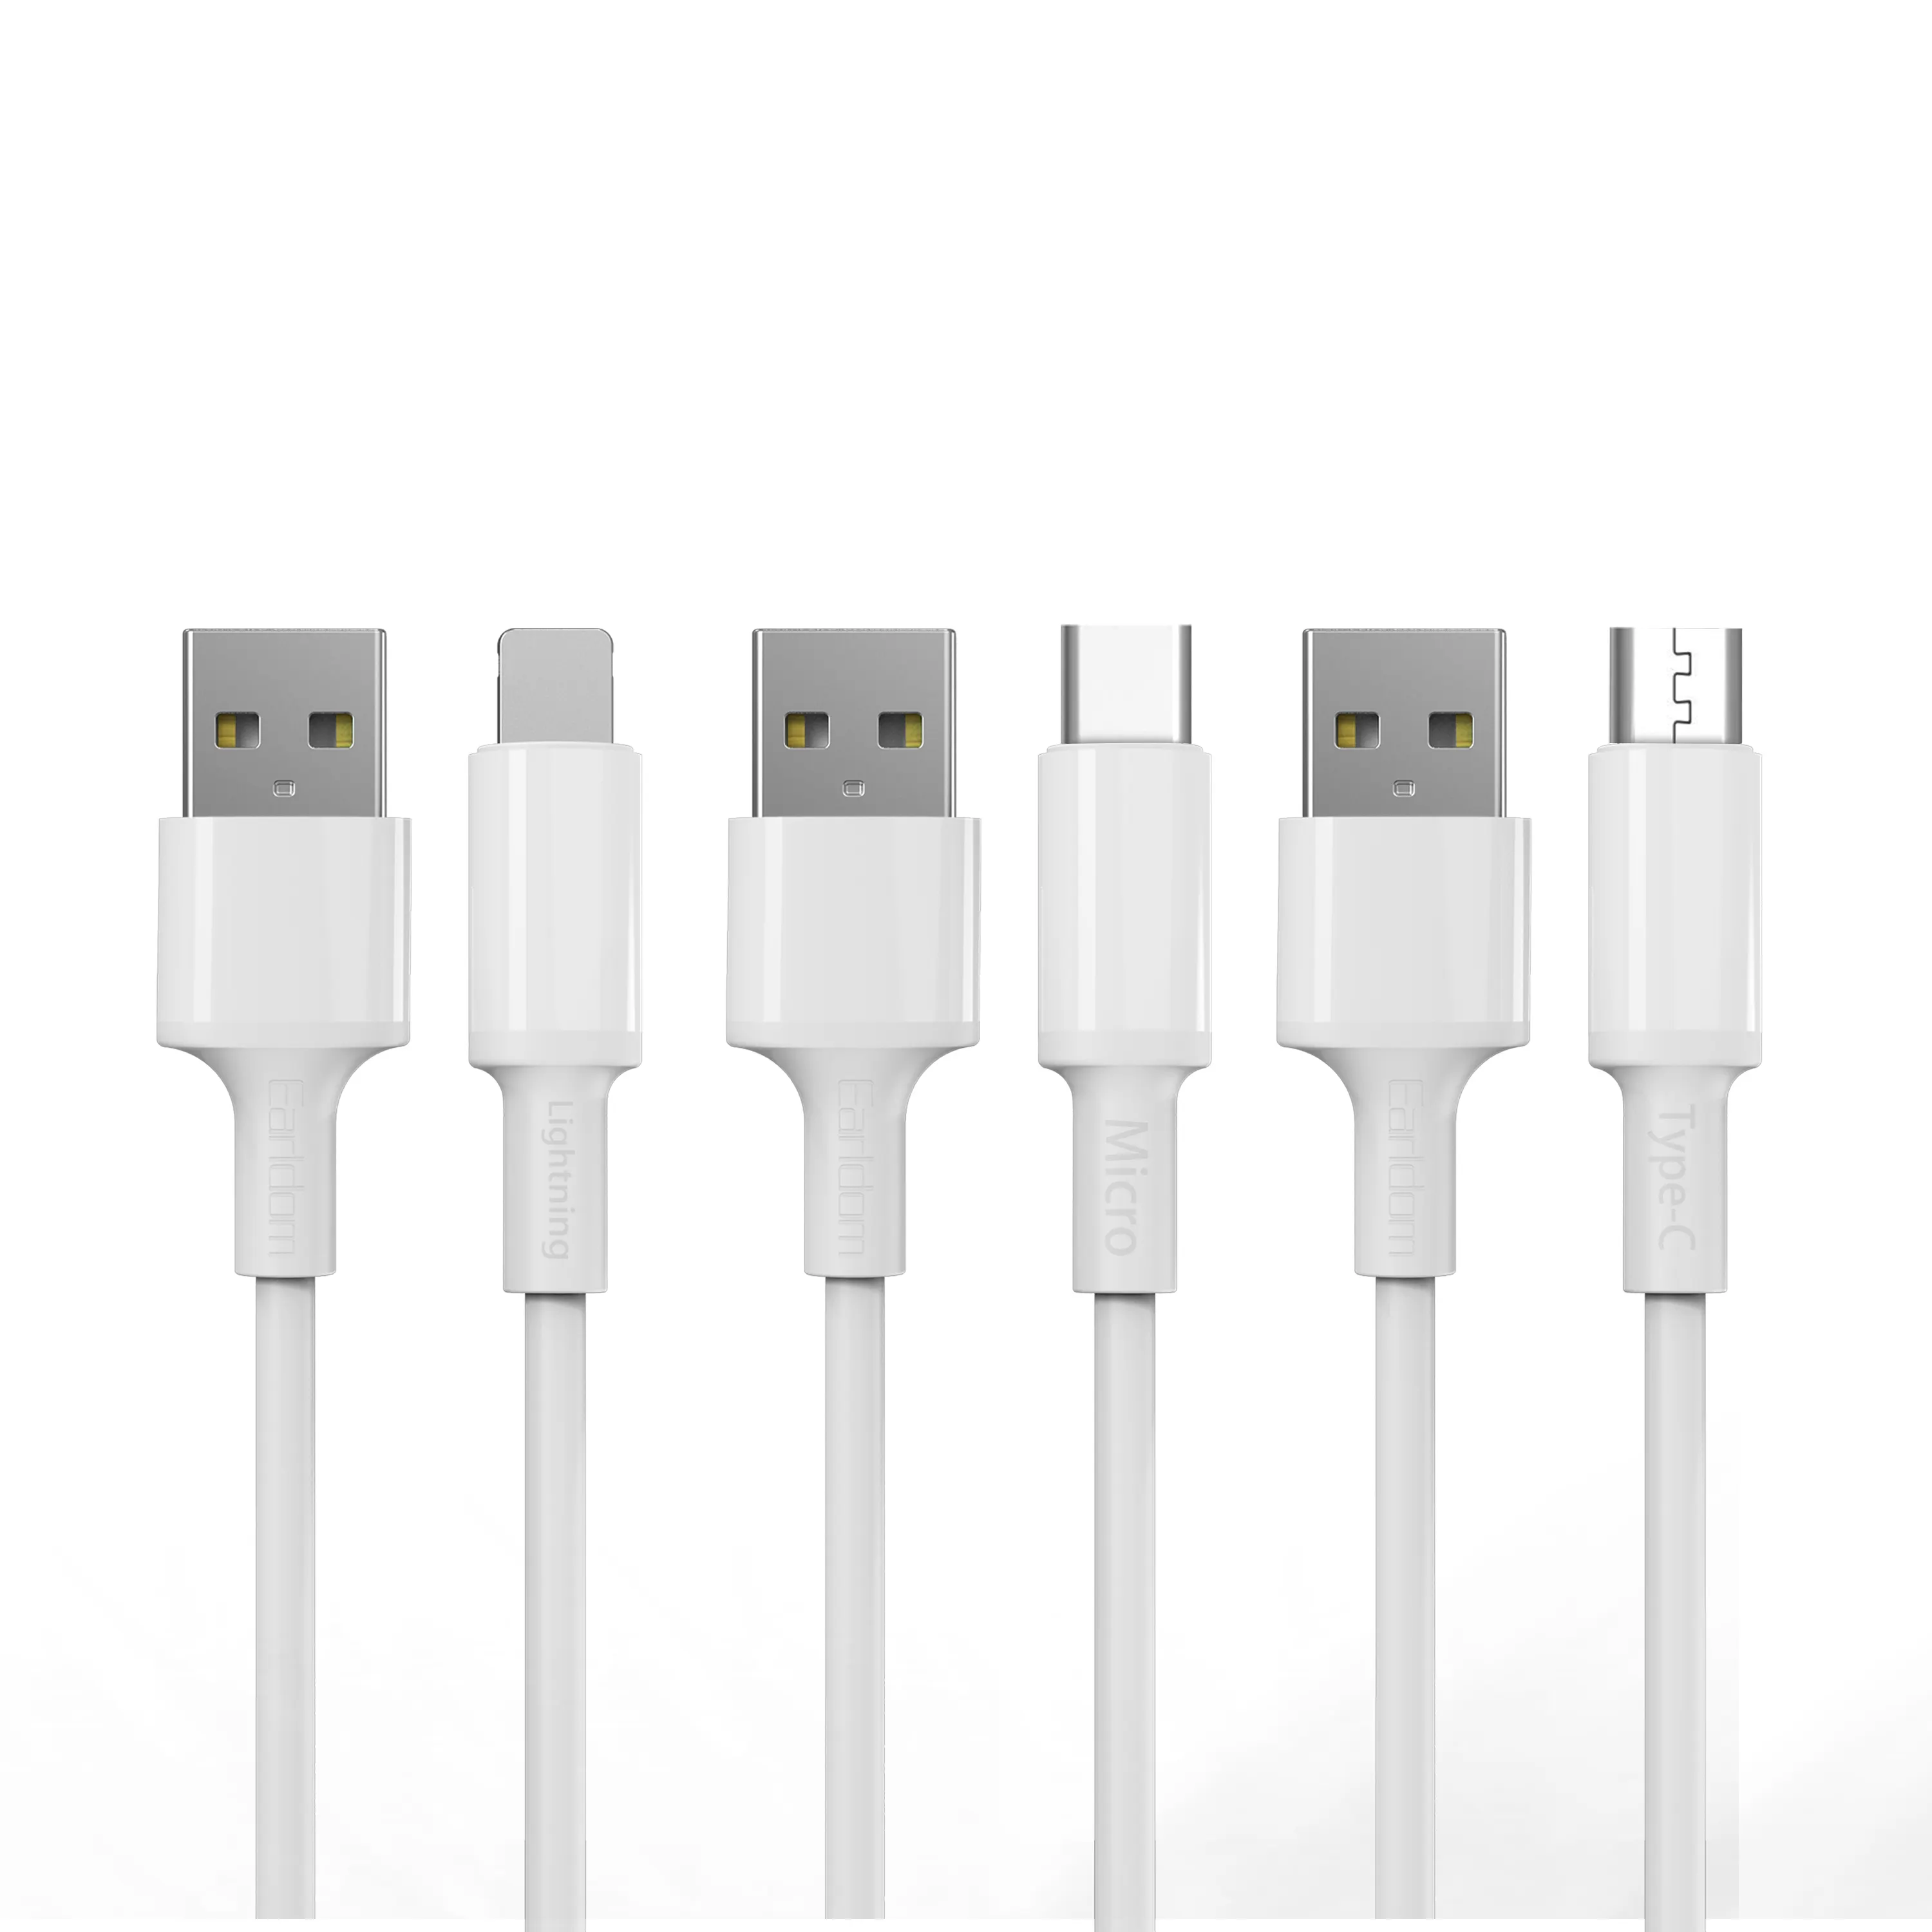 Earldom Usb Charging Cable Usb Type C Cable Fast Charging For Samsung Mobile Phone Charger Data Cables